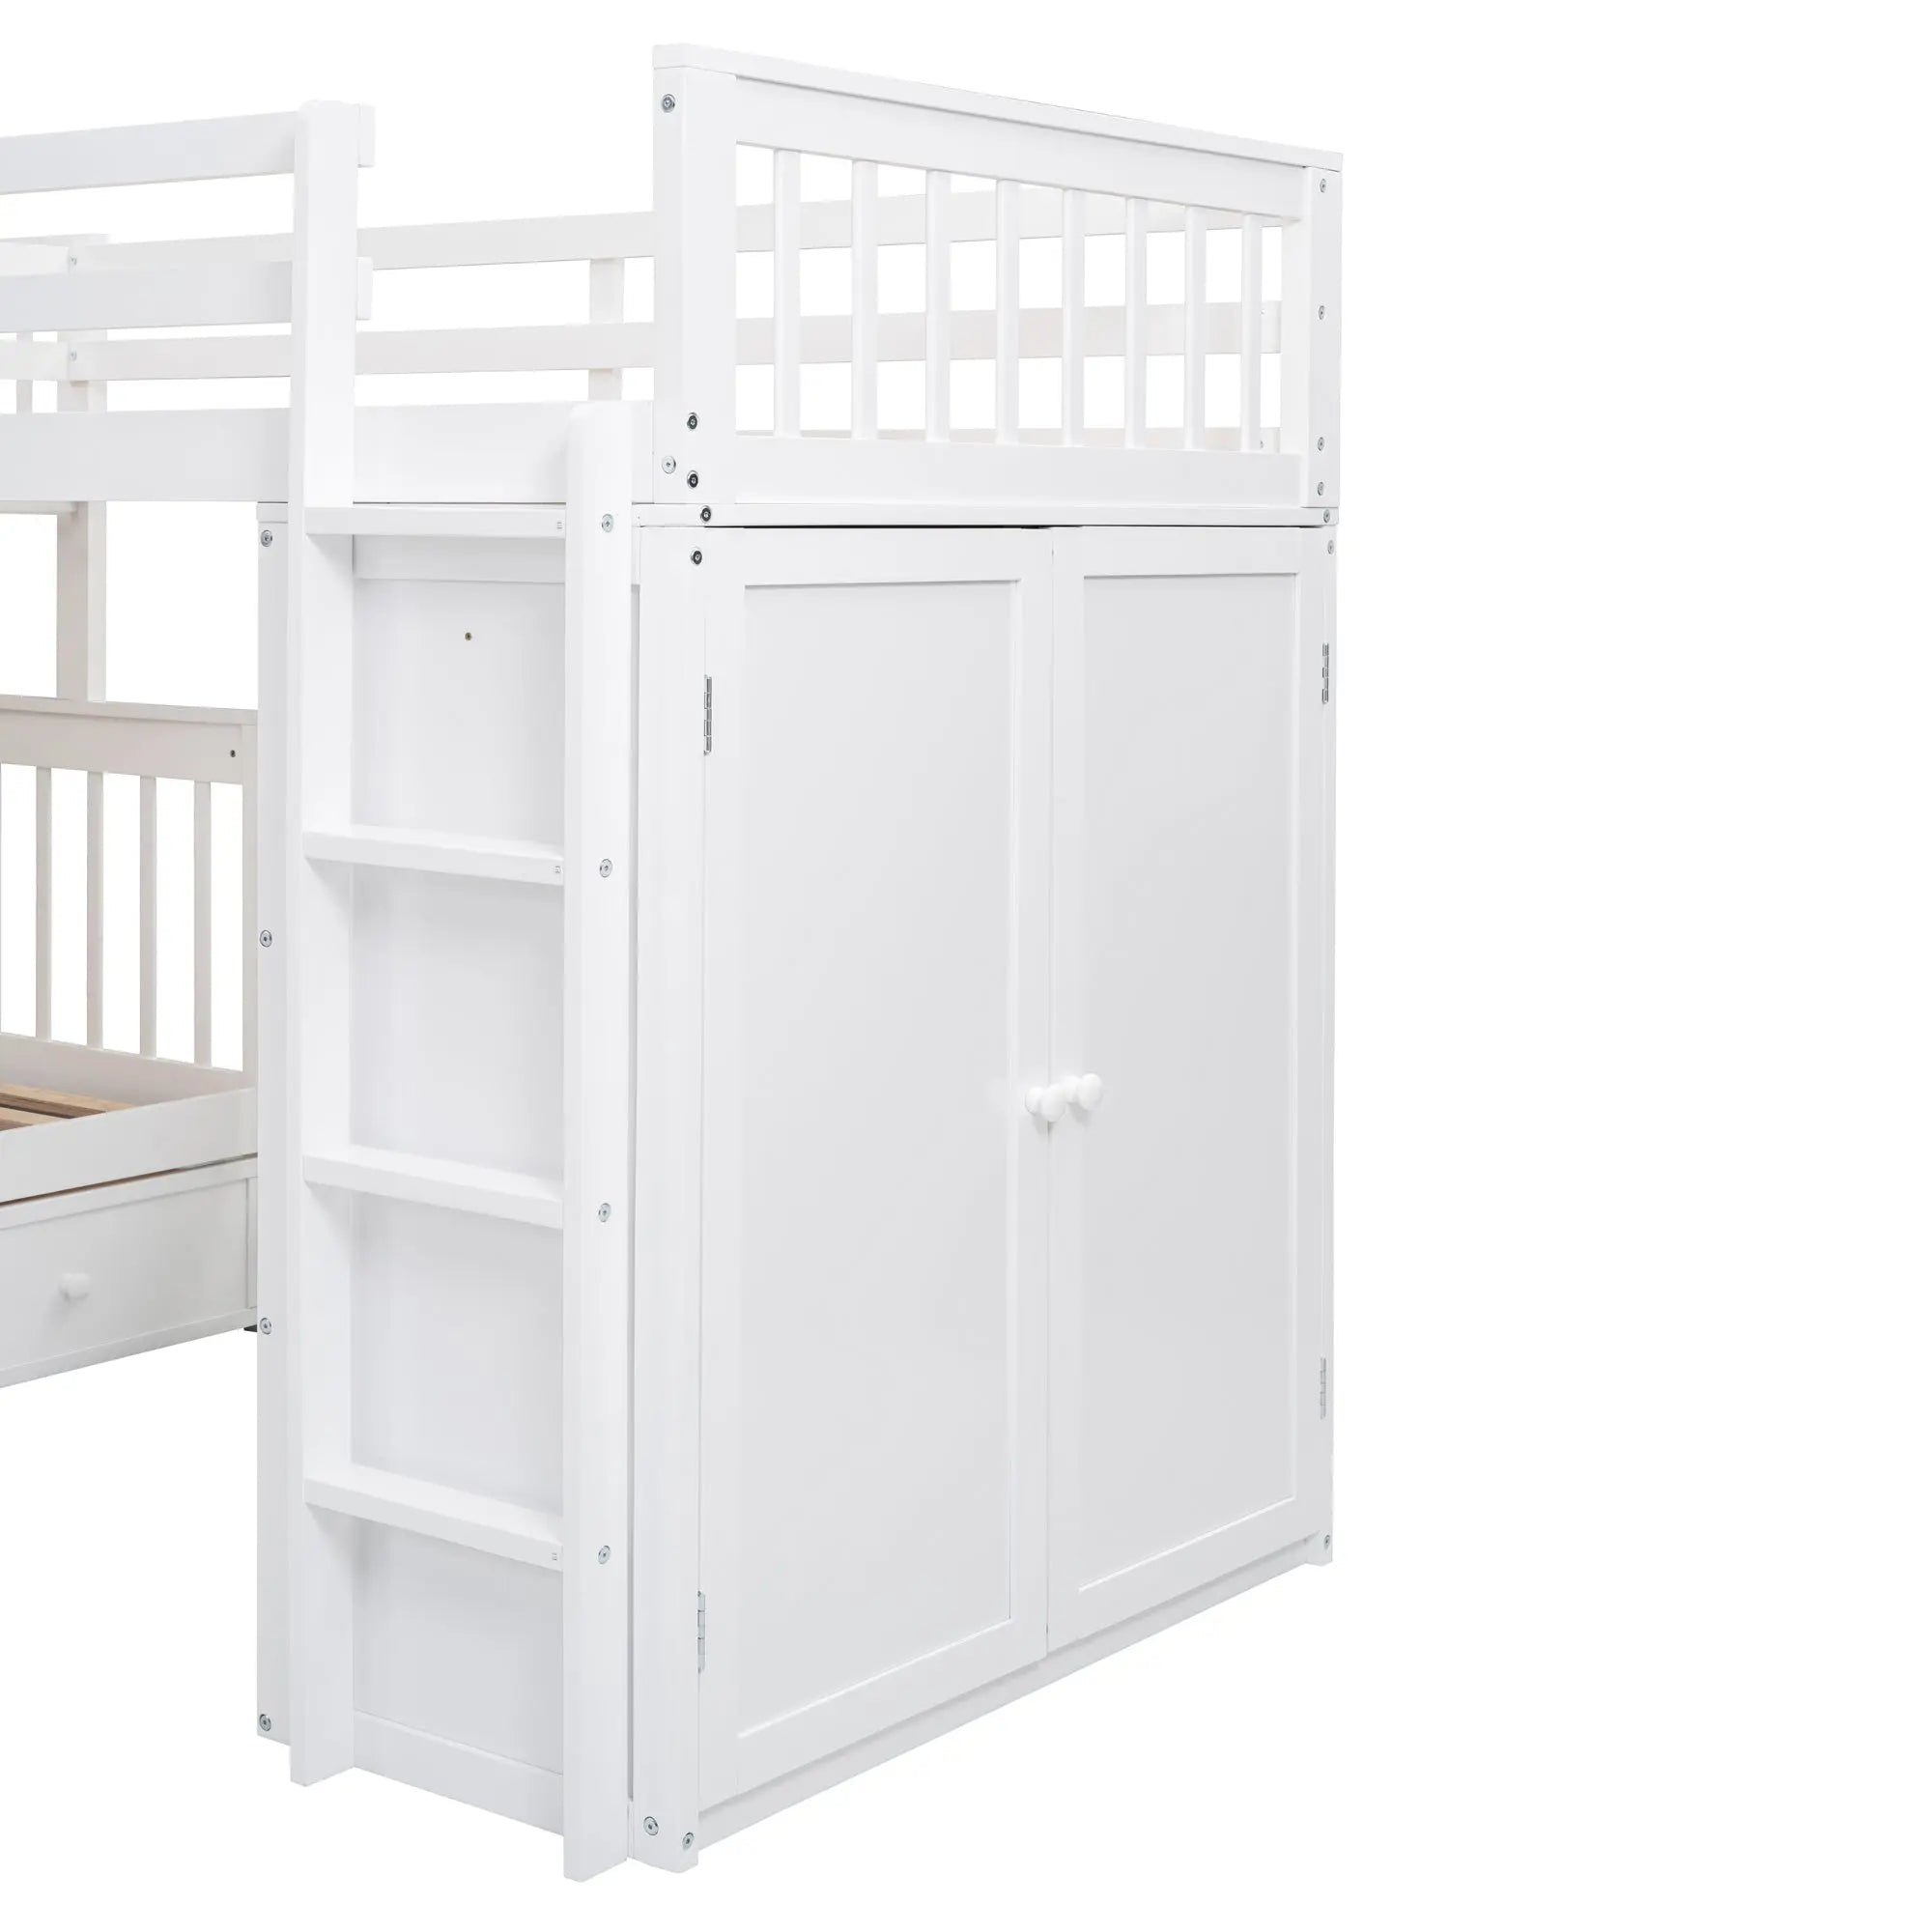 Bellemave® Twin & Twin over Full L-Shaped Bunk Bed with 3 Drawers, Portable Desk and Wardrobe Bellemave®